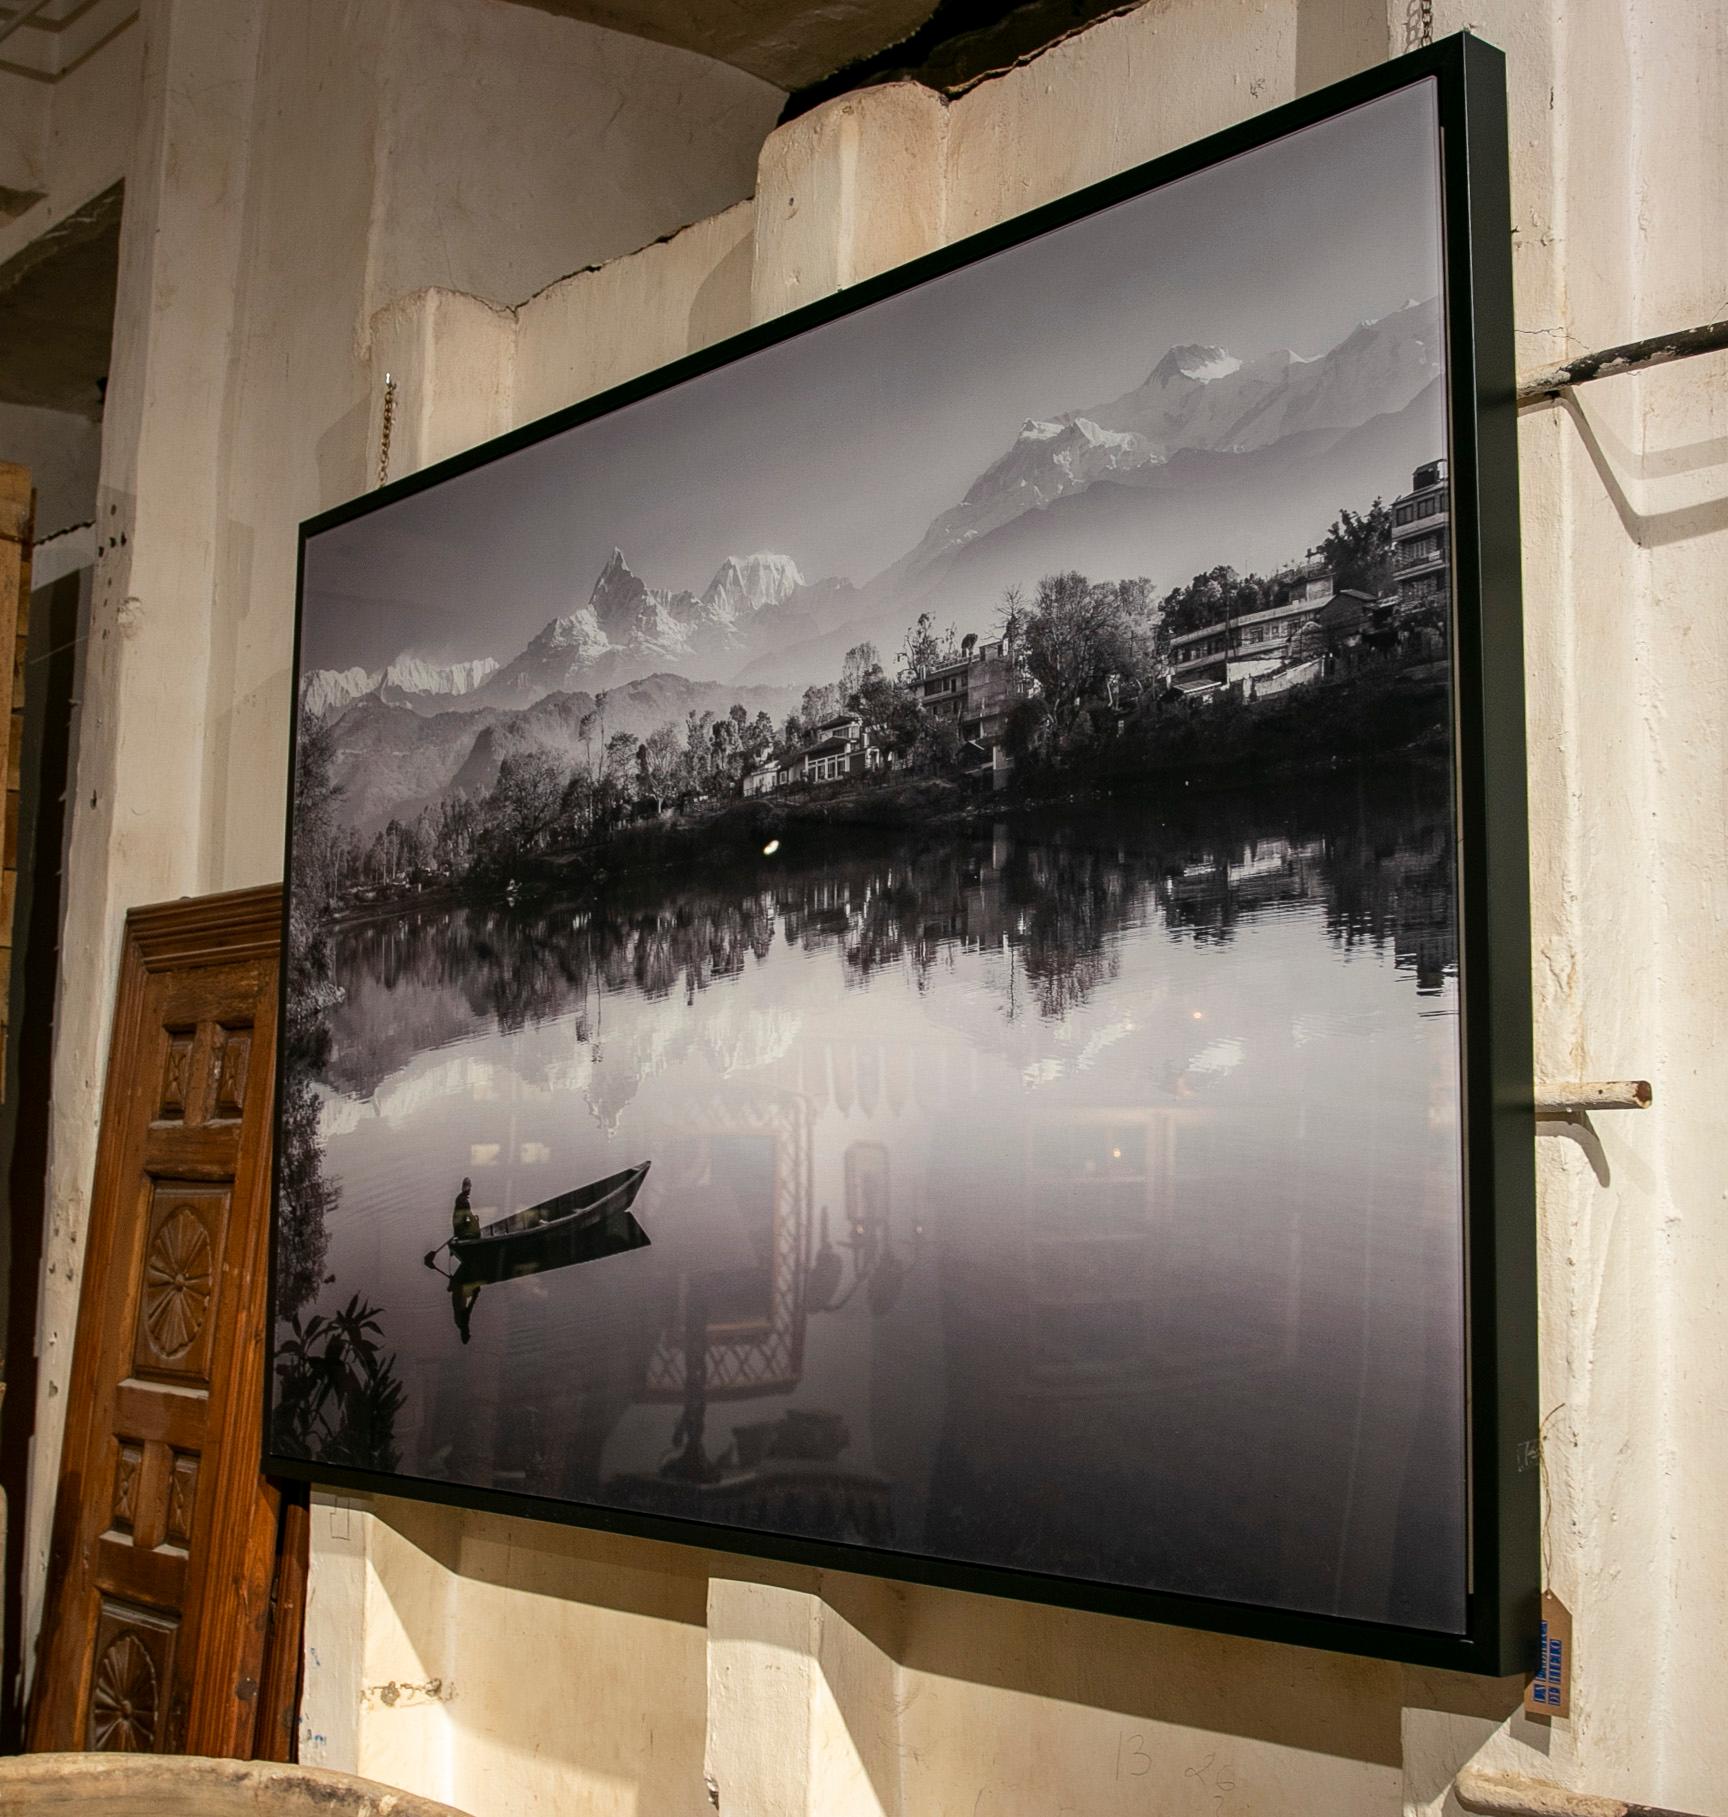 Metraquilat Framed Photo by the Artist Gonzalo Botet , 